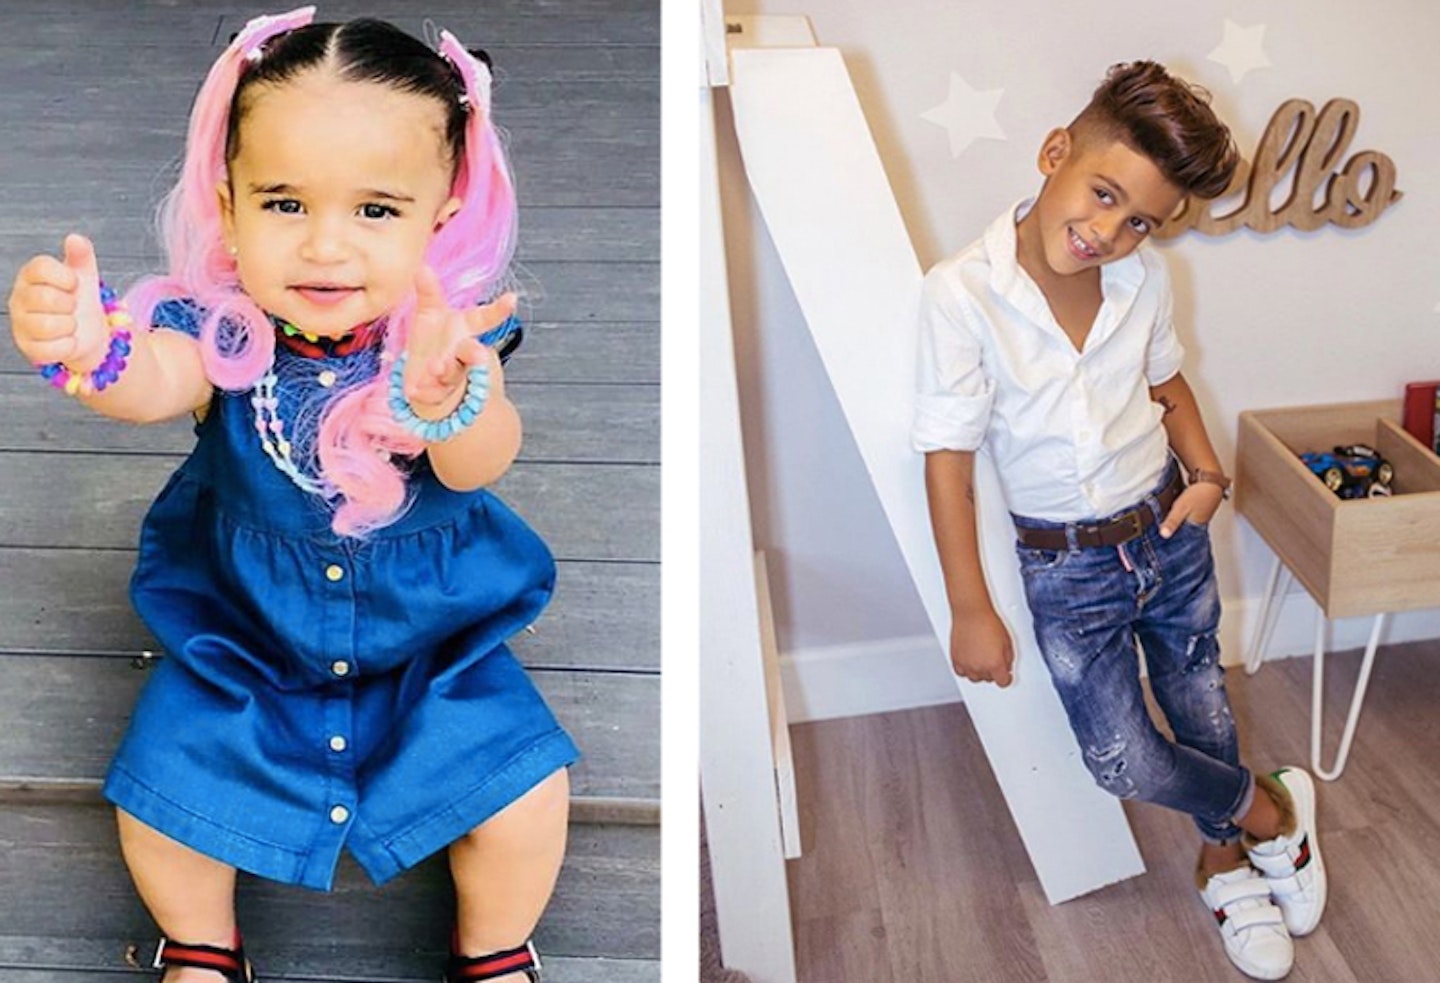 Meet the stylish tots who are already famous on Instagram